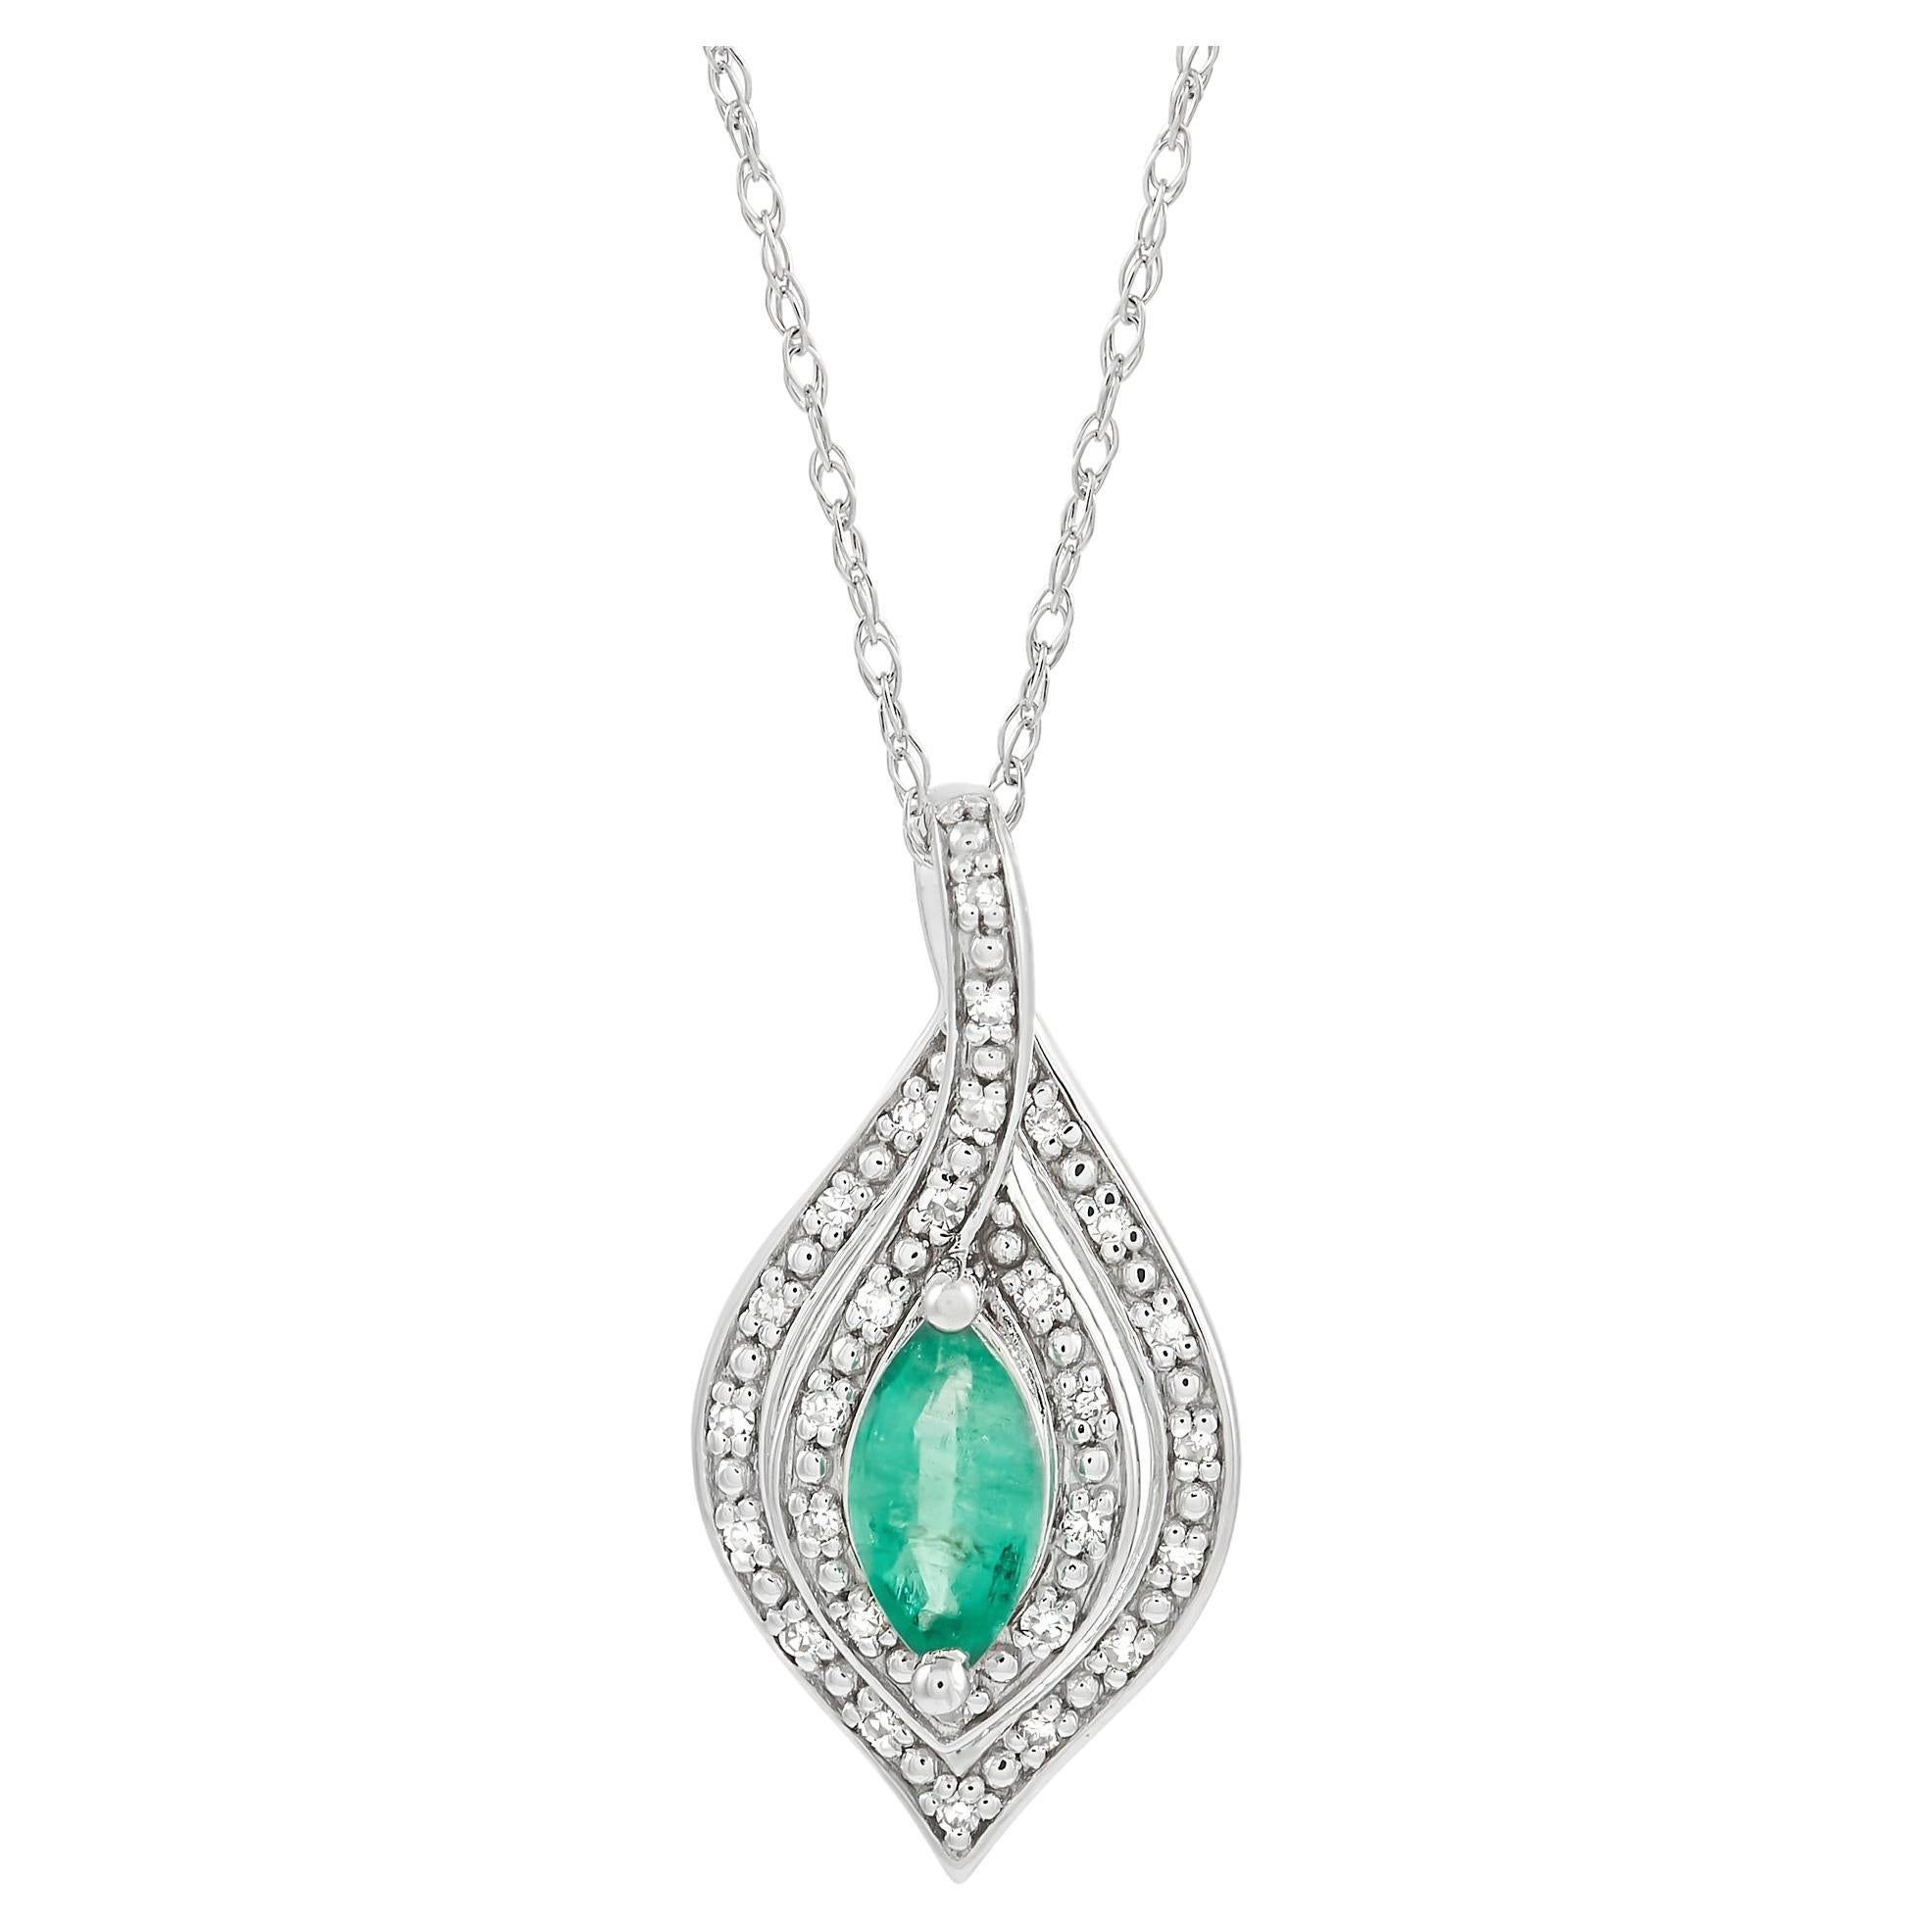 LB Exclusive 14K White Gold 0.08 Ct Diamond and Emerald Necklace